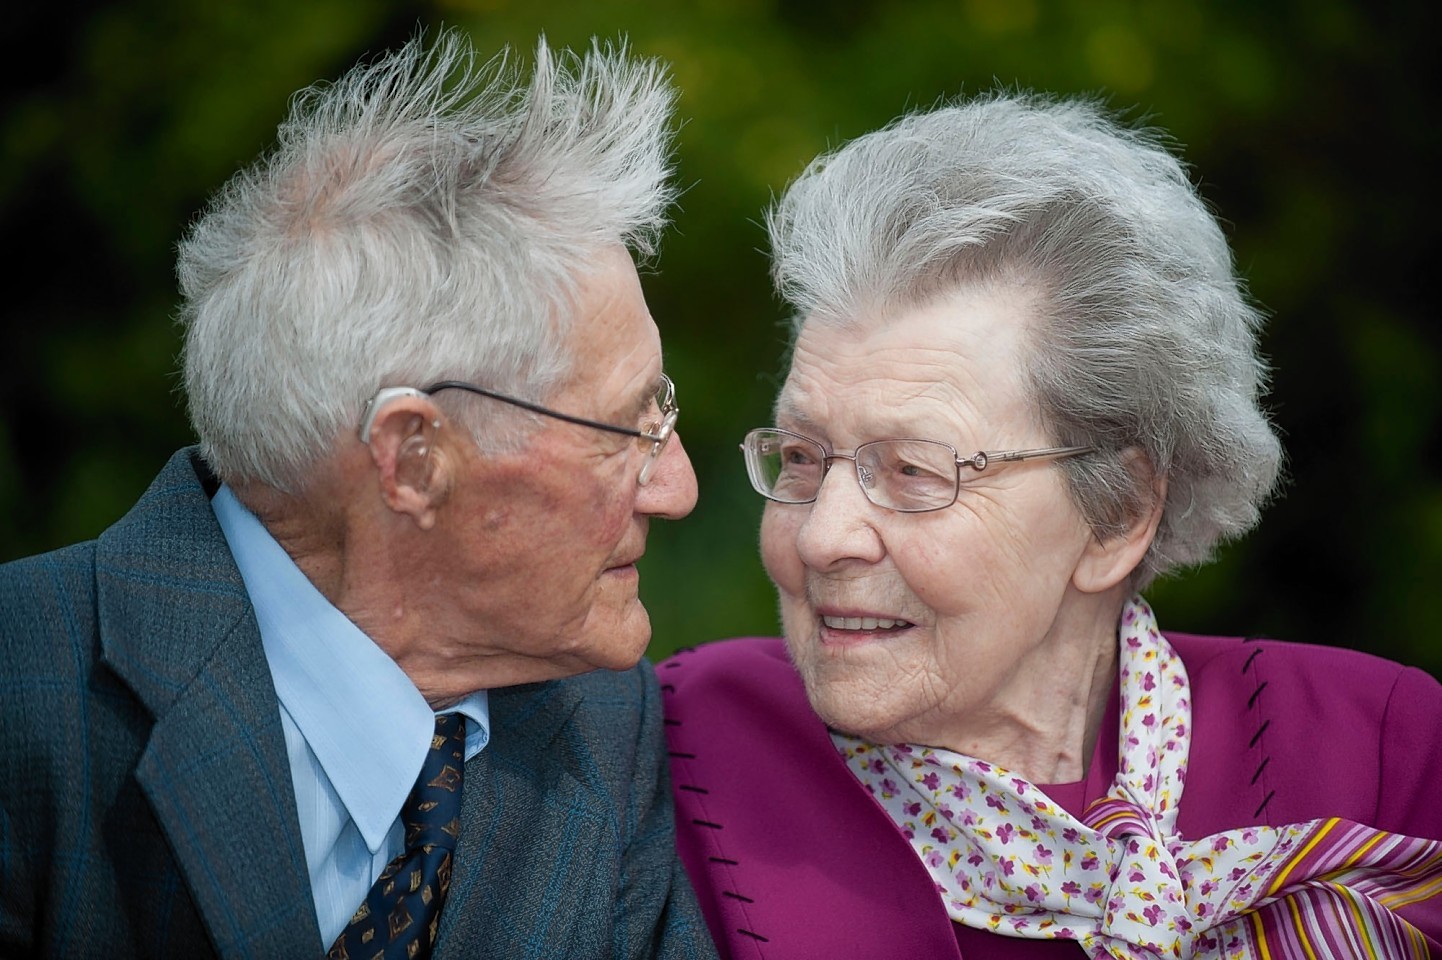 James and Mary Coutts celebrate their 70th wedding anniversary